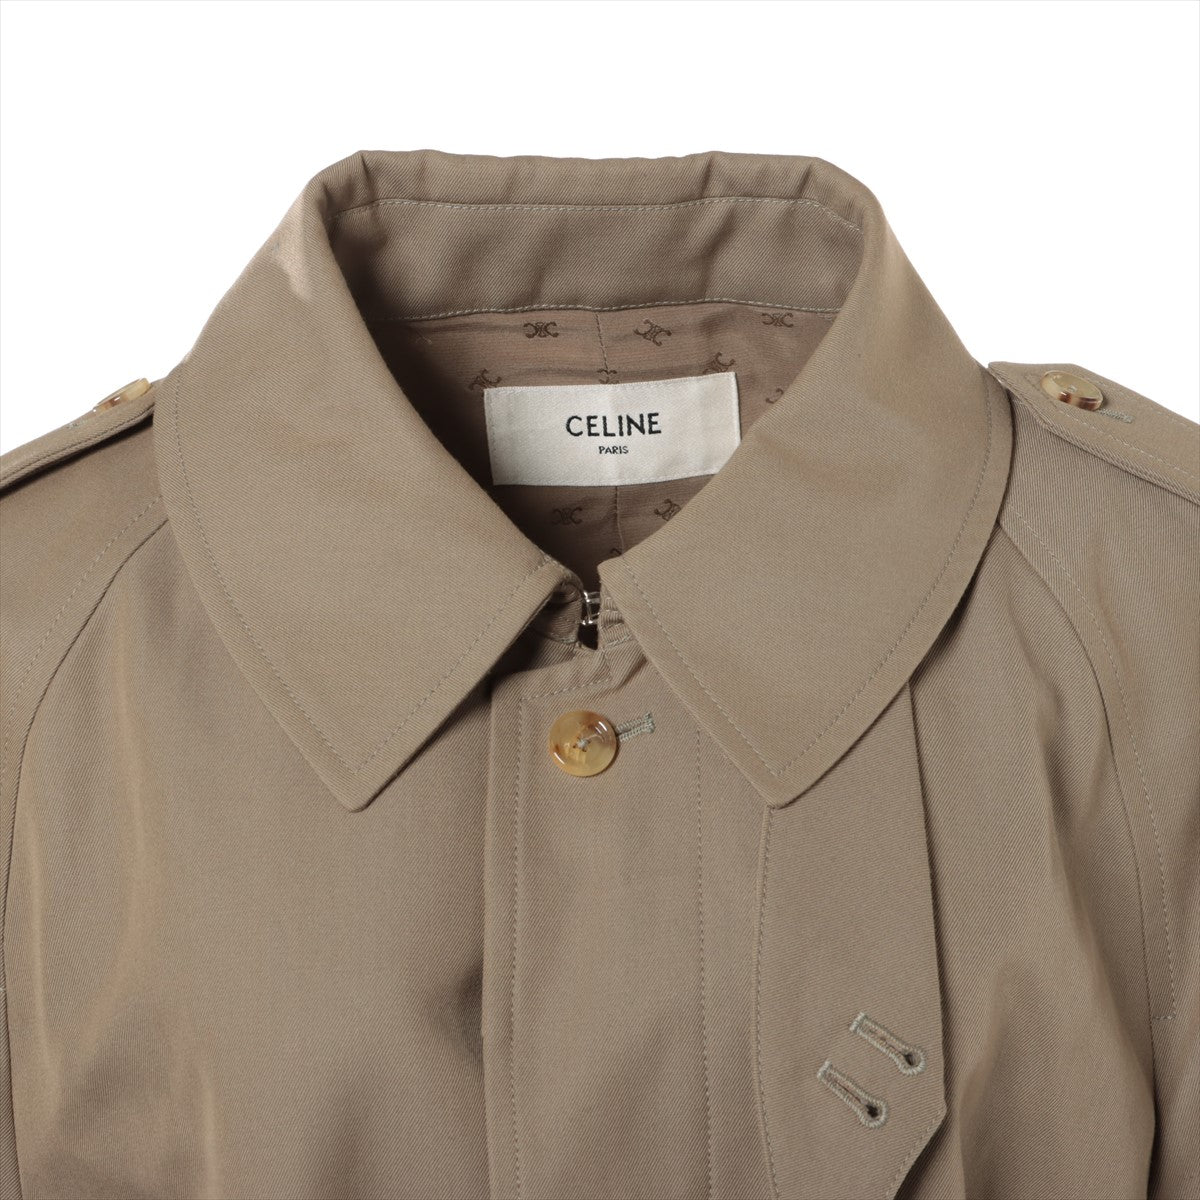 Celine Hedi Period Cotton & Wool Trench Coat 42 Ladies' Beige  2M332984C Oversized belted